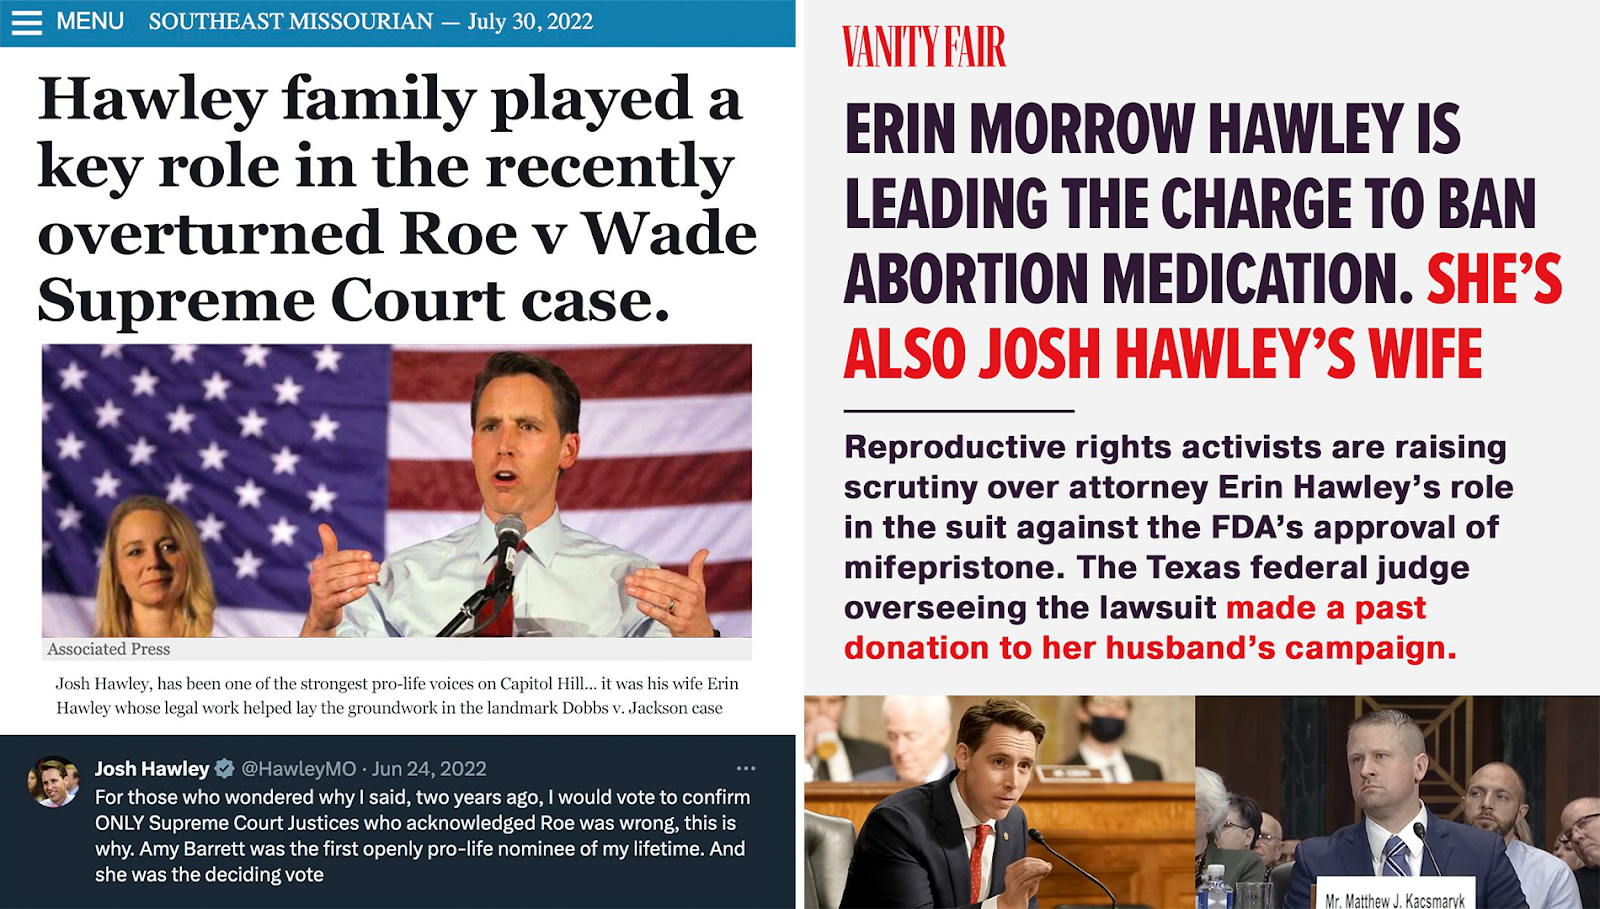 On the left, a headline from the Southeast Missourian: Hawley family played a key role in the recently overturned Roe v. Wade Supreme Court case. Beneath that, a tweet from Hawley: For those who wondered why I said, two years ago, I would vote to confirm ONLY Supreme Court Justices who acknowledged Roe was wrong, this is why. Amy Barrett was the first openly pro-life nominee of my lifetime. And she was the deciding vote. On the right, a headline from Vanity Fair: Erin Morrow Hawley is leading the charge to ban abortion medication. She's also Josh Hawley's wife.